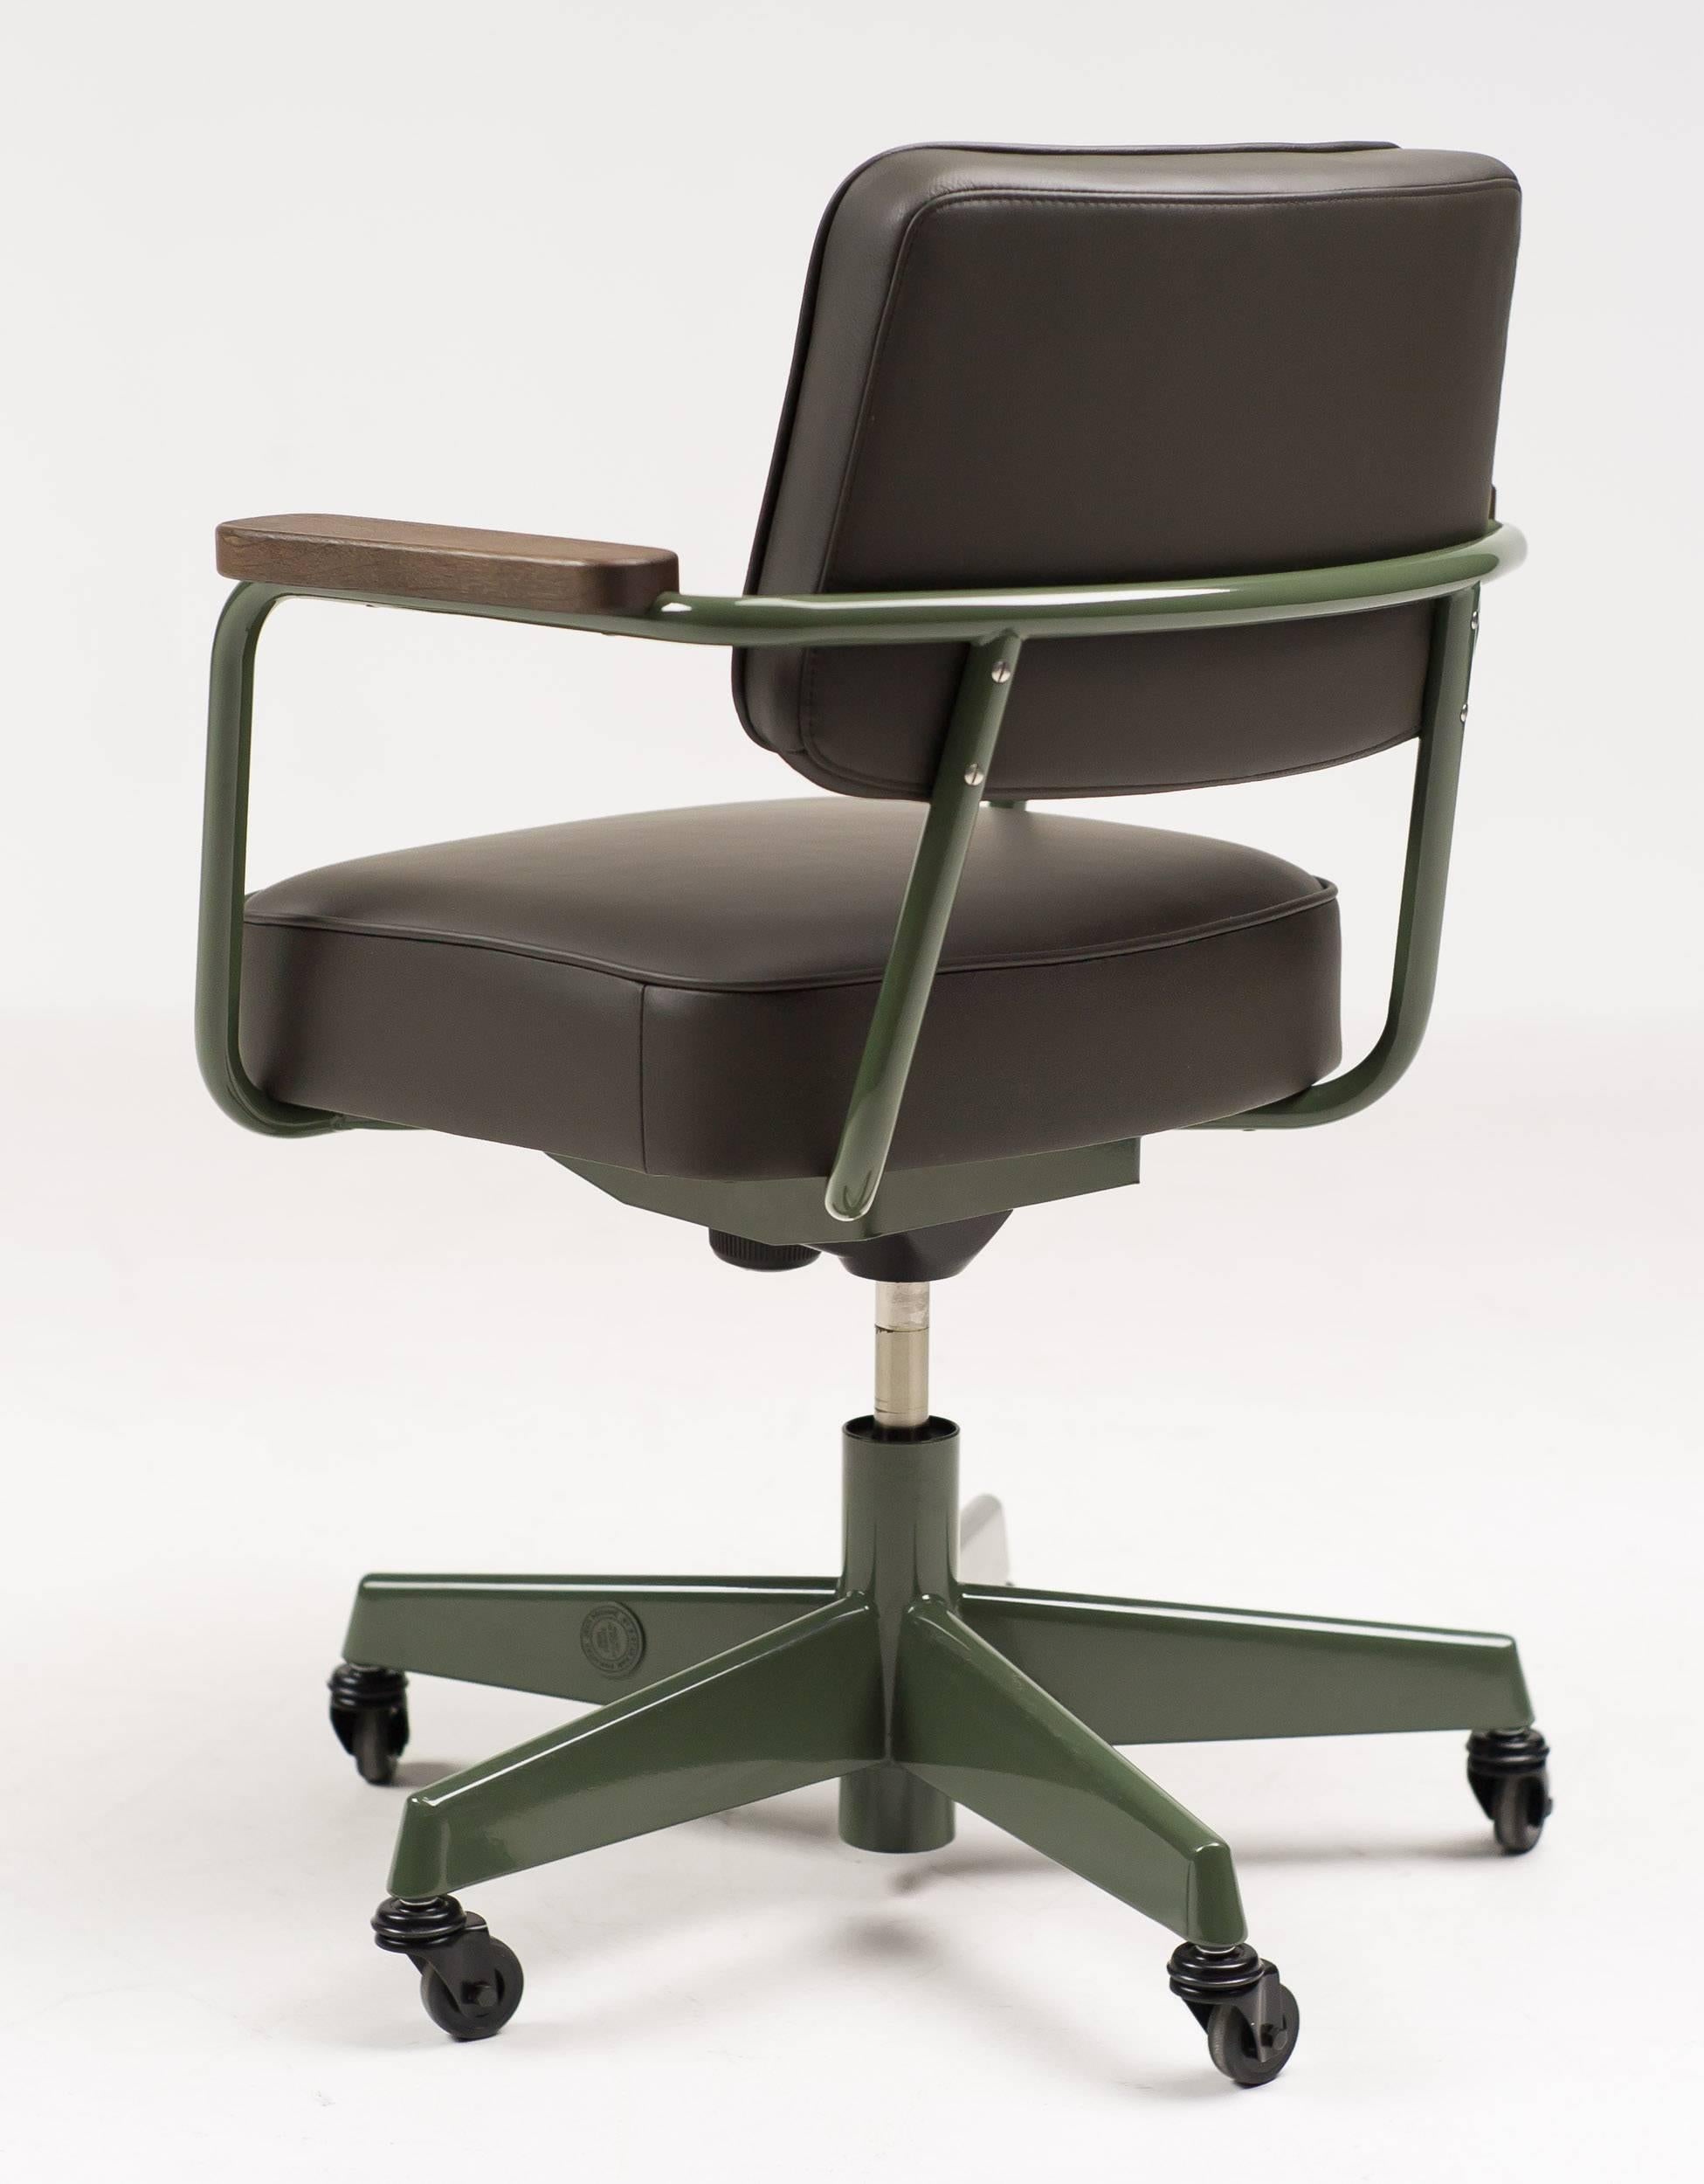 Limited edition desk chair from the G-Star raw edition made by Vitra.
G-Star ordered these chairs for their new Headquarters in Amsterdam by the architect Rem Koolhaas. They where also available for a limited time for other Prouvé collectors.